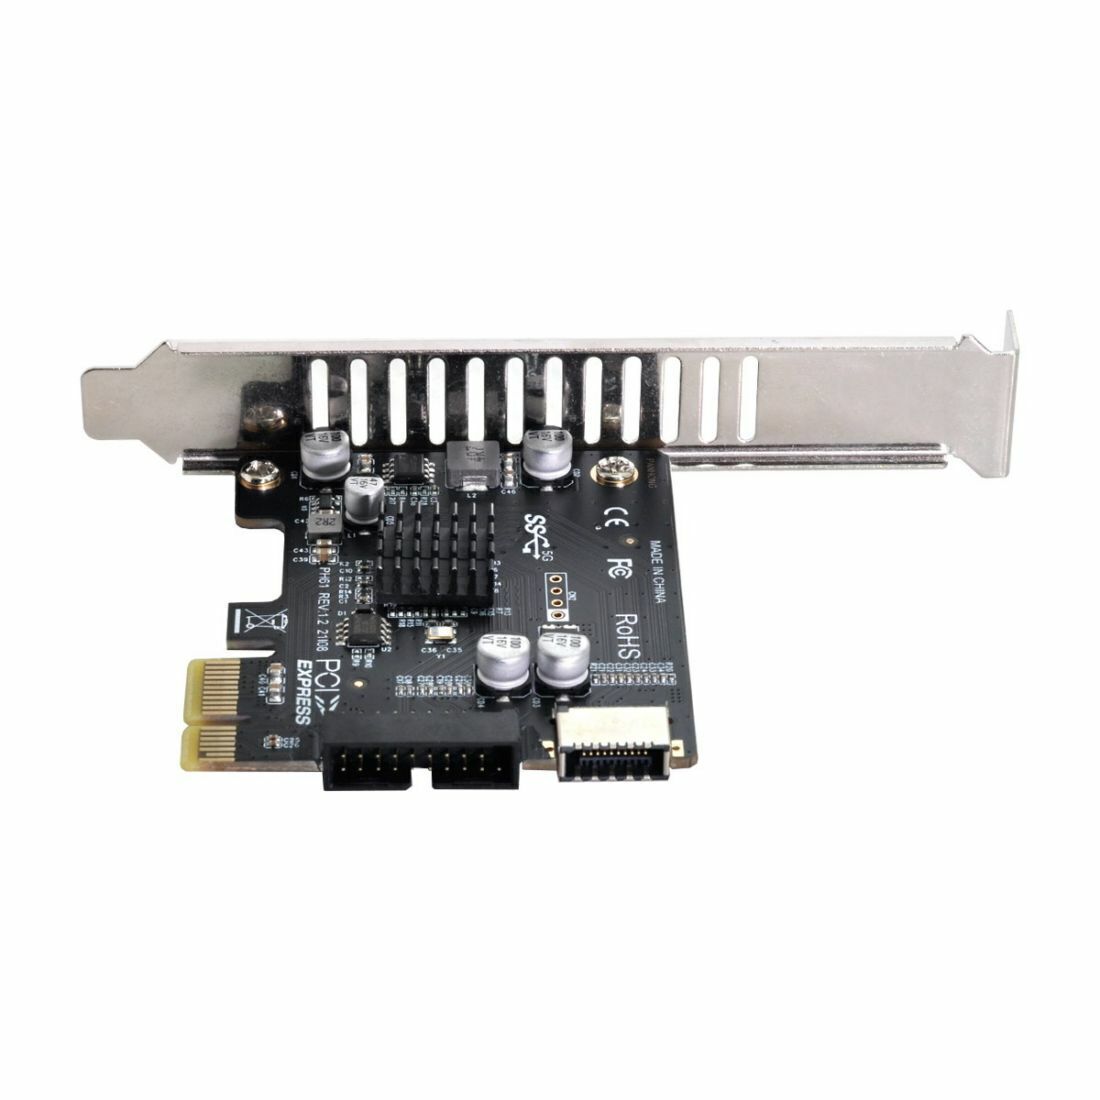 Jimier USB3.1 TypeE Front Panel Socket & USB2.0 to PCI-E 1X Express Card Adapter